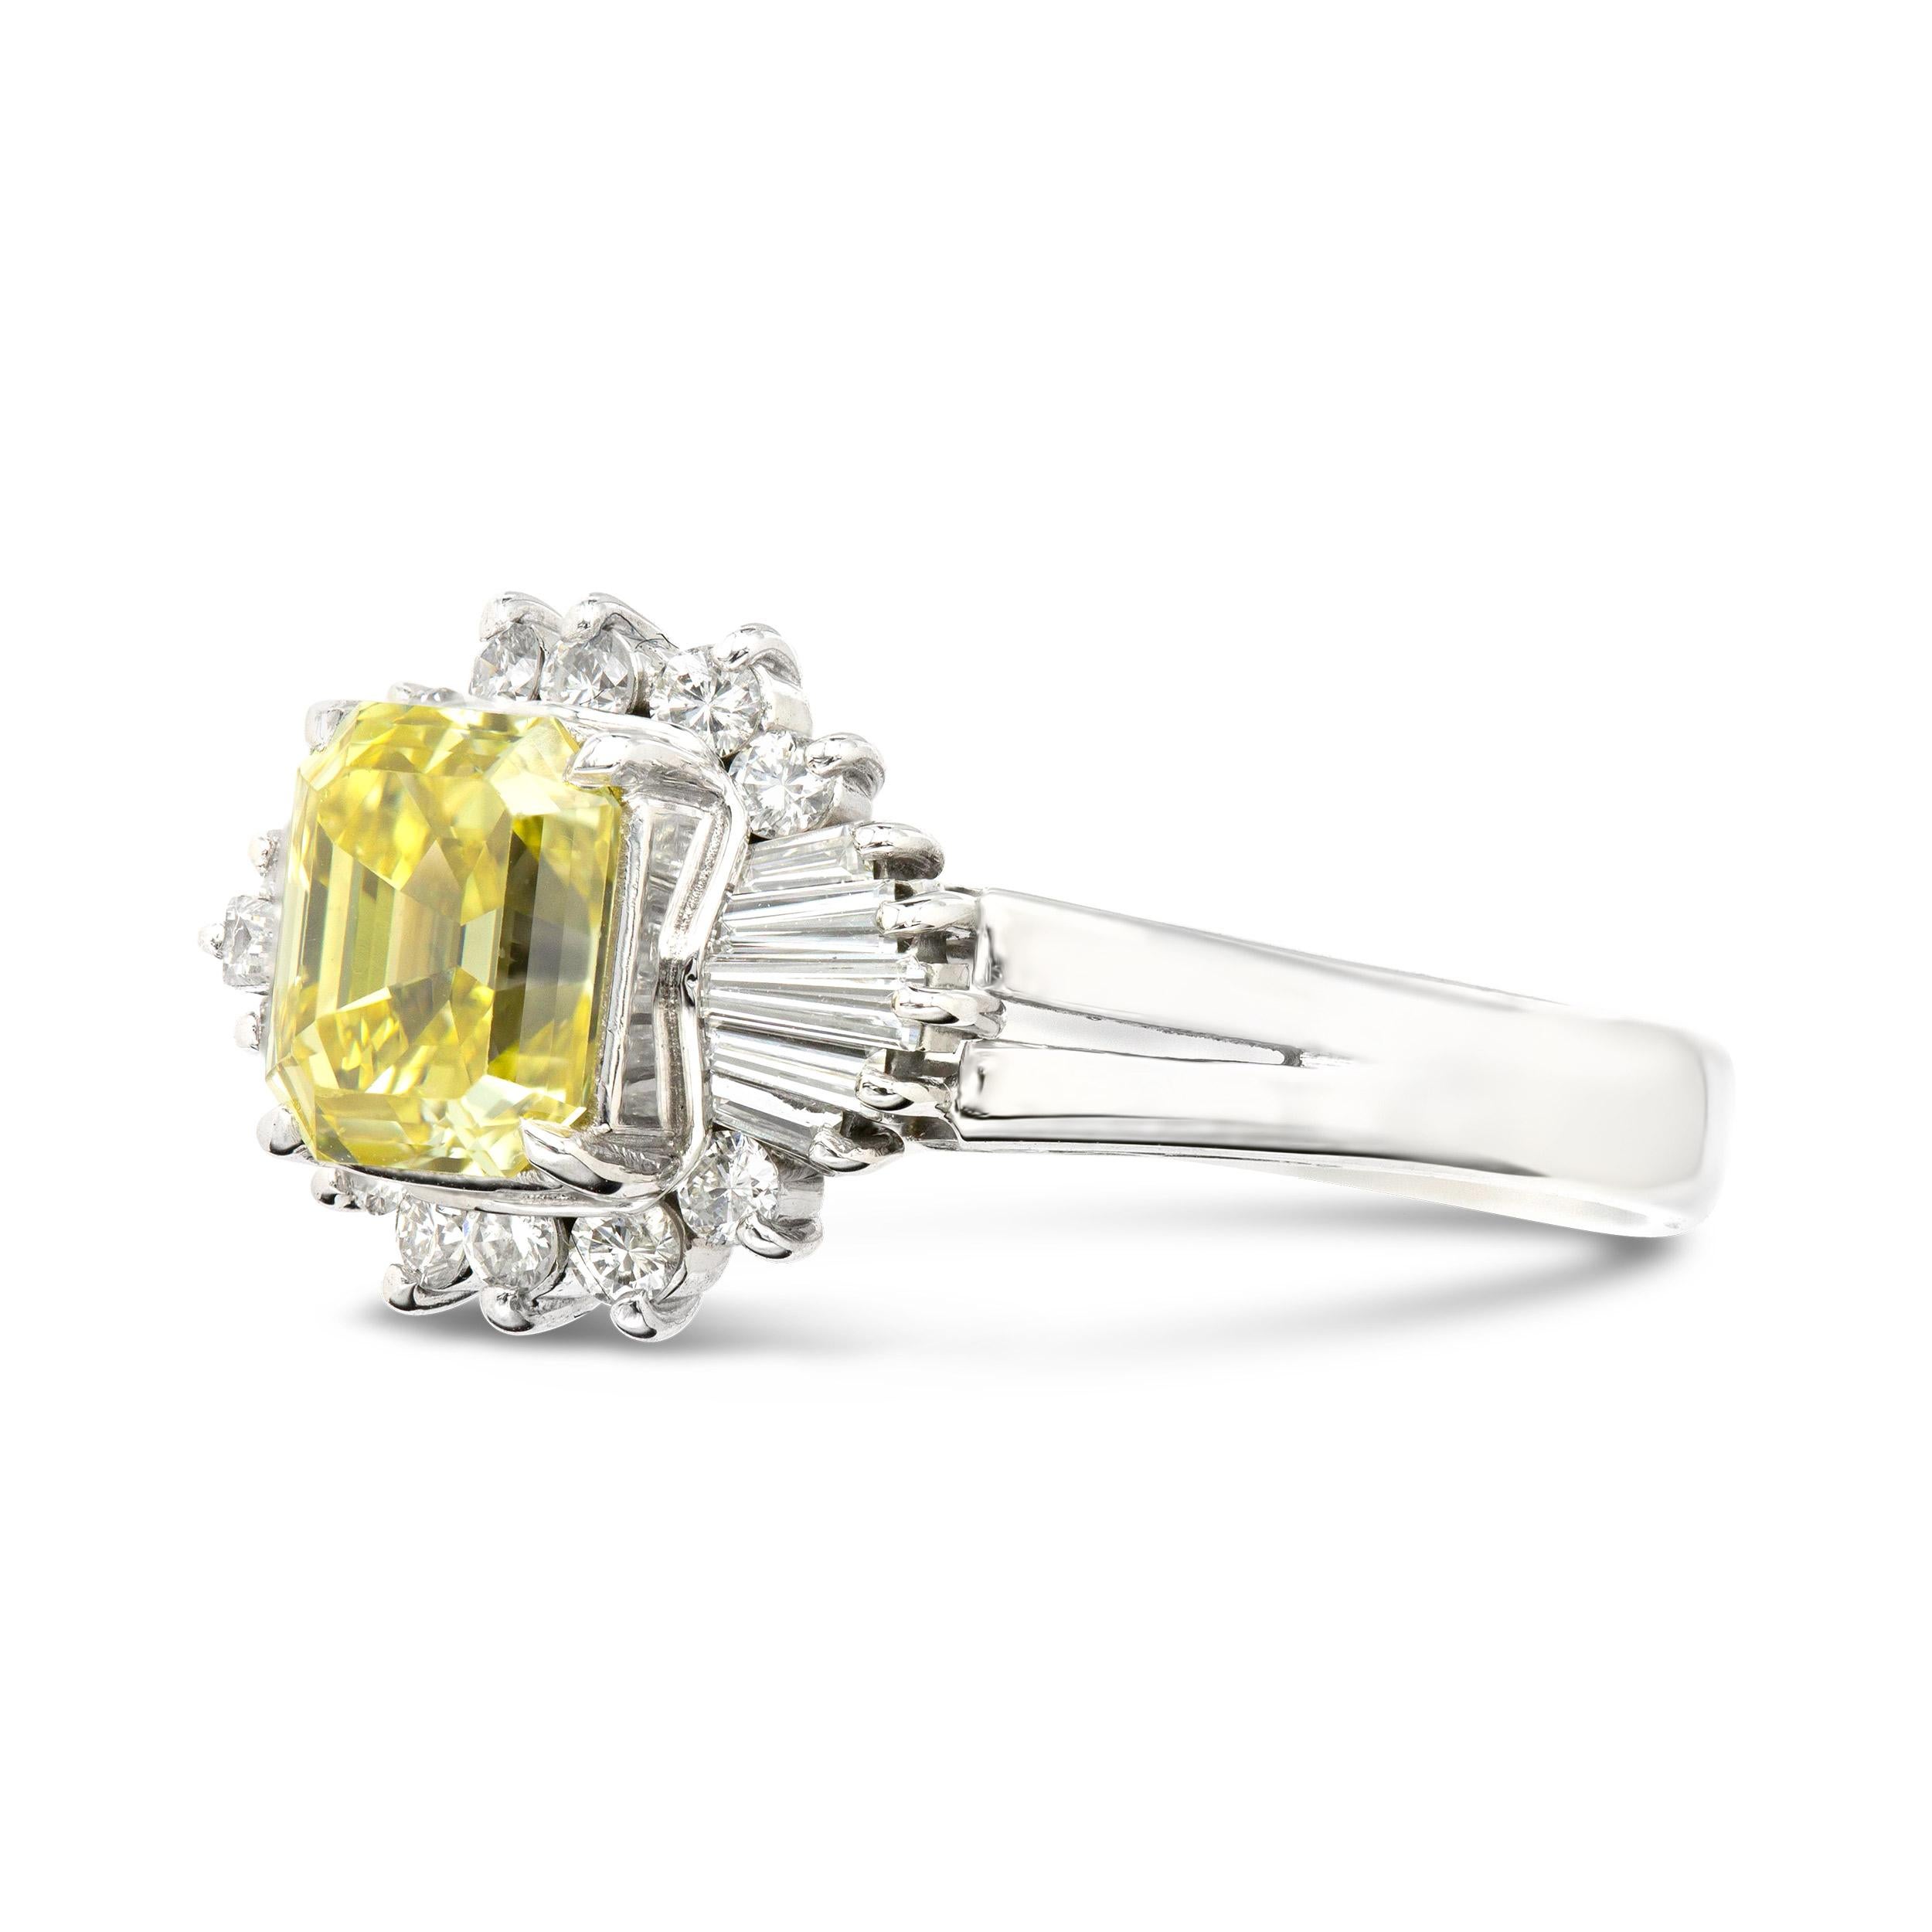 We love a pop of color, especially from a vivid and bright fancy colored diamond. The center GIA certified Emerald Cut, graded fancy intense yellow, shines among a cluster of icy white diamonds. A beautiful ballerina ring that is both elegant and